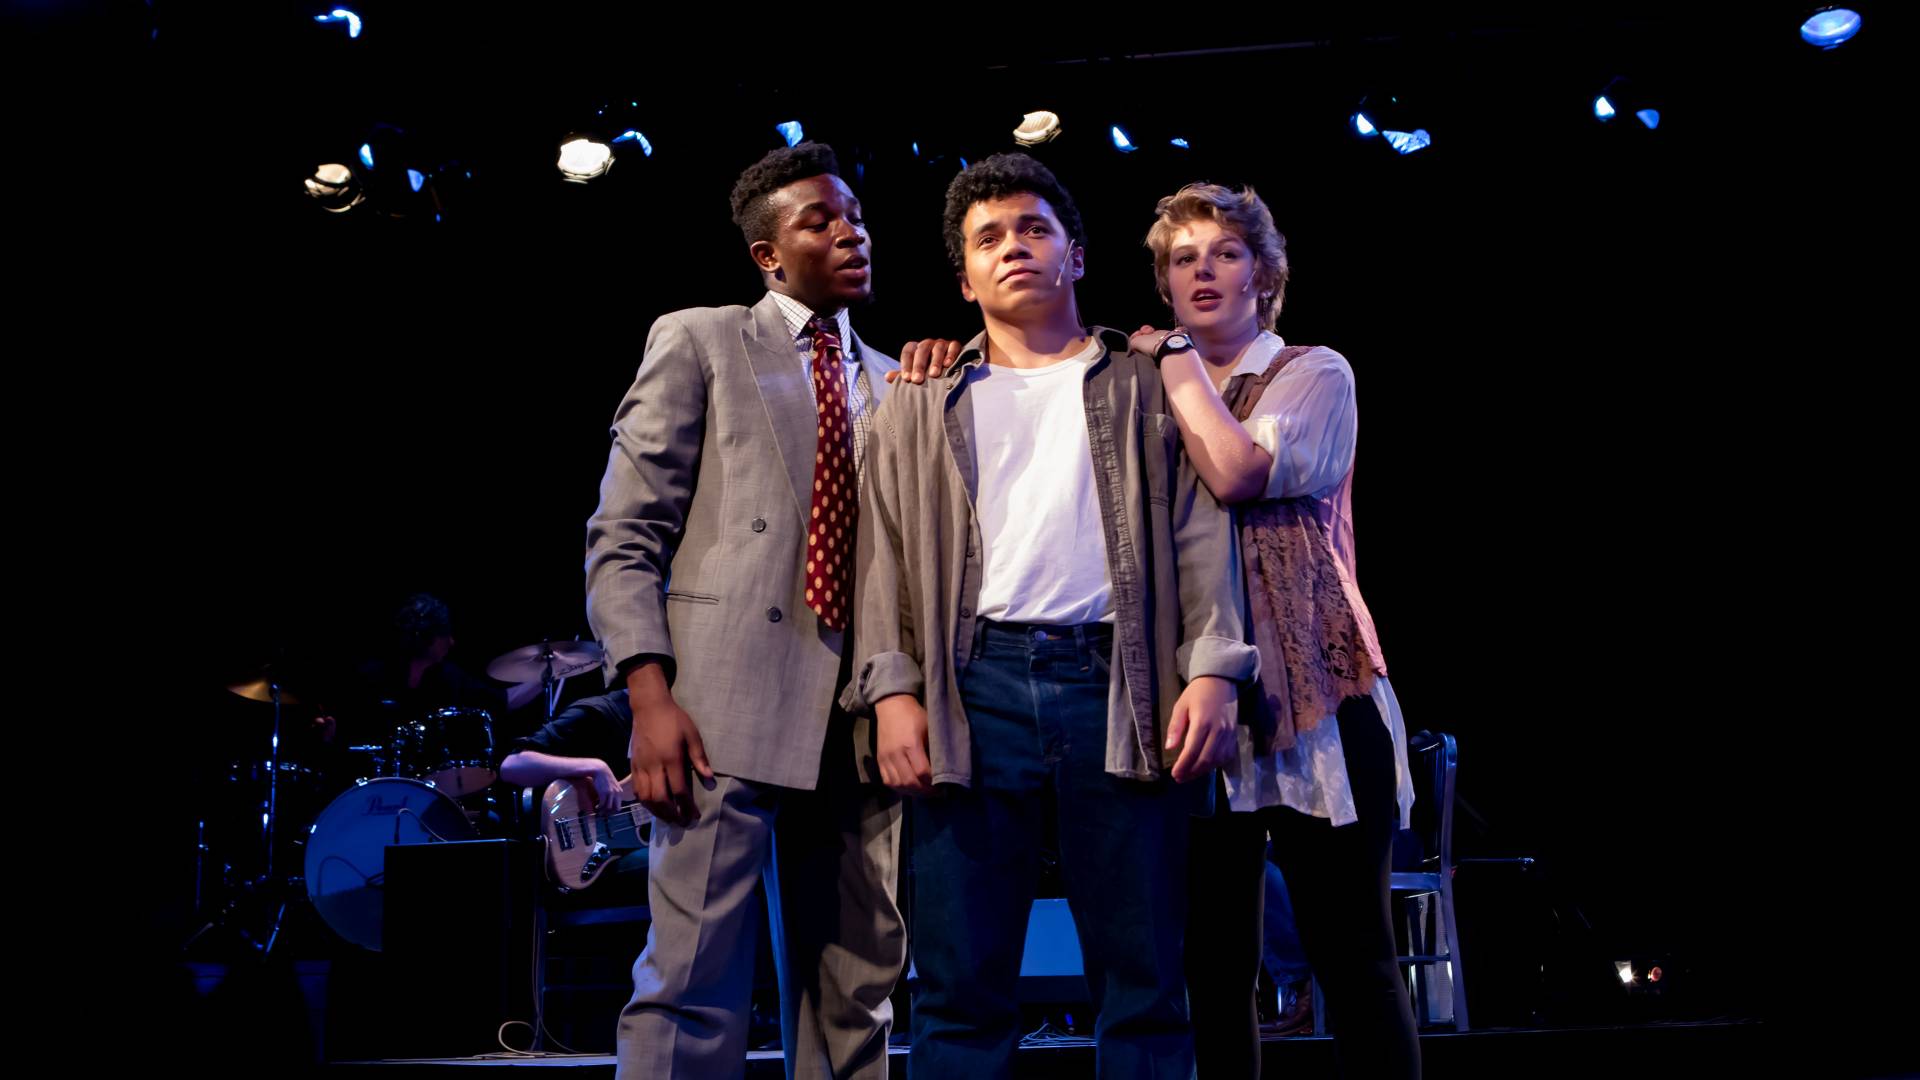 Actors and musicians on stage for musical "Tick, Tick...Boom"